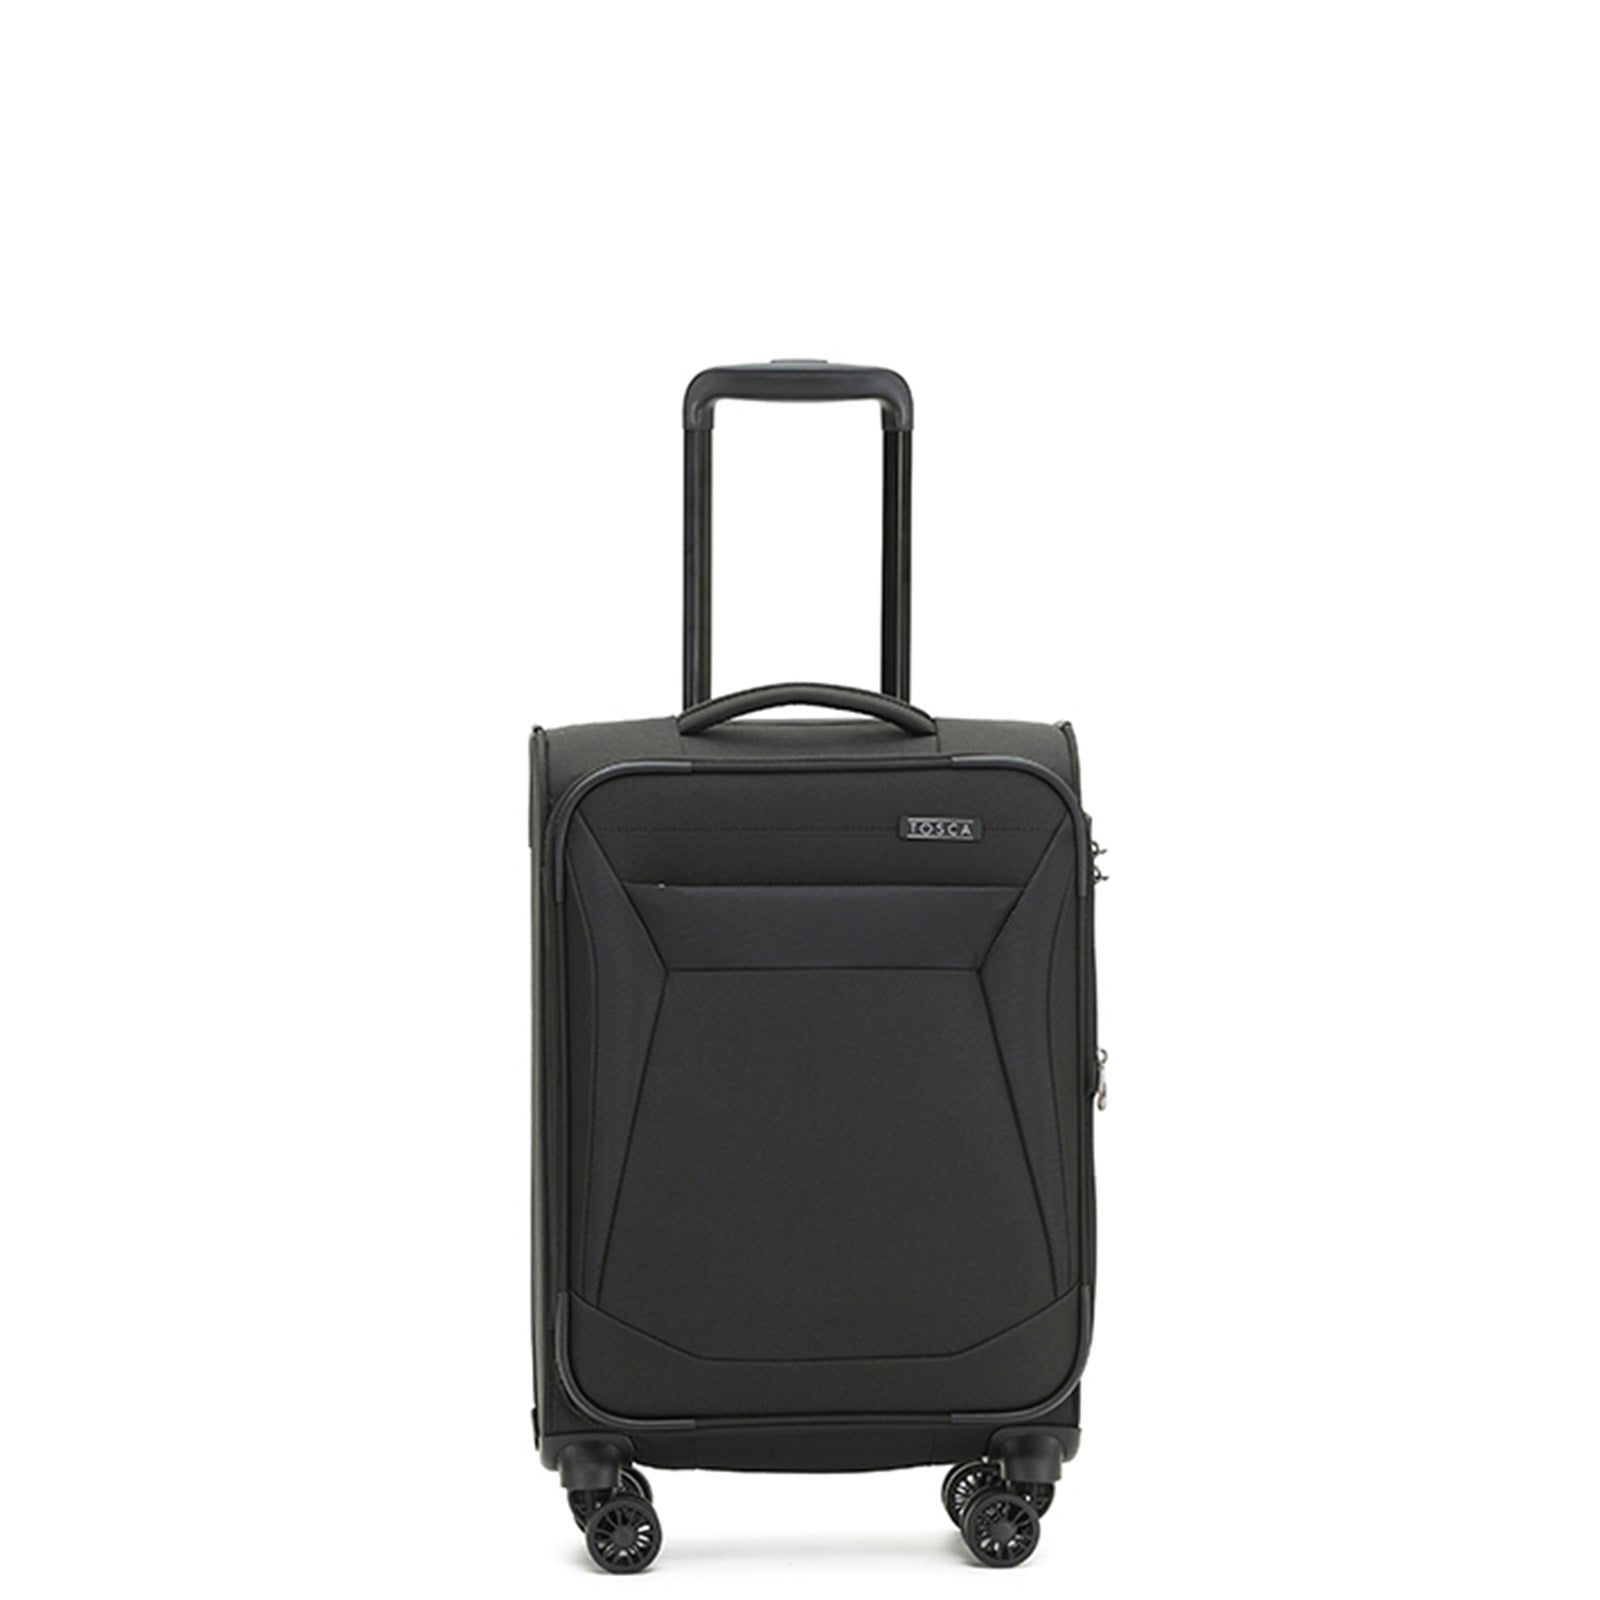 Tosca-Aviator-4-Wheel-Carry-On-Suitcase-Black-Front